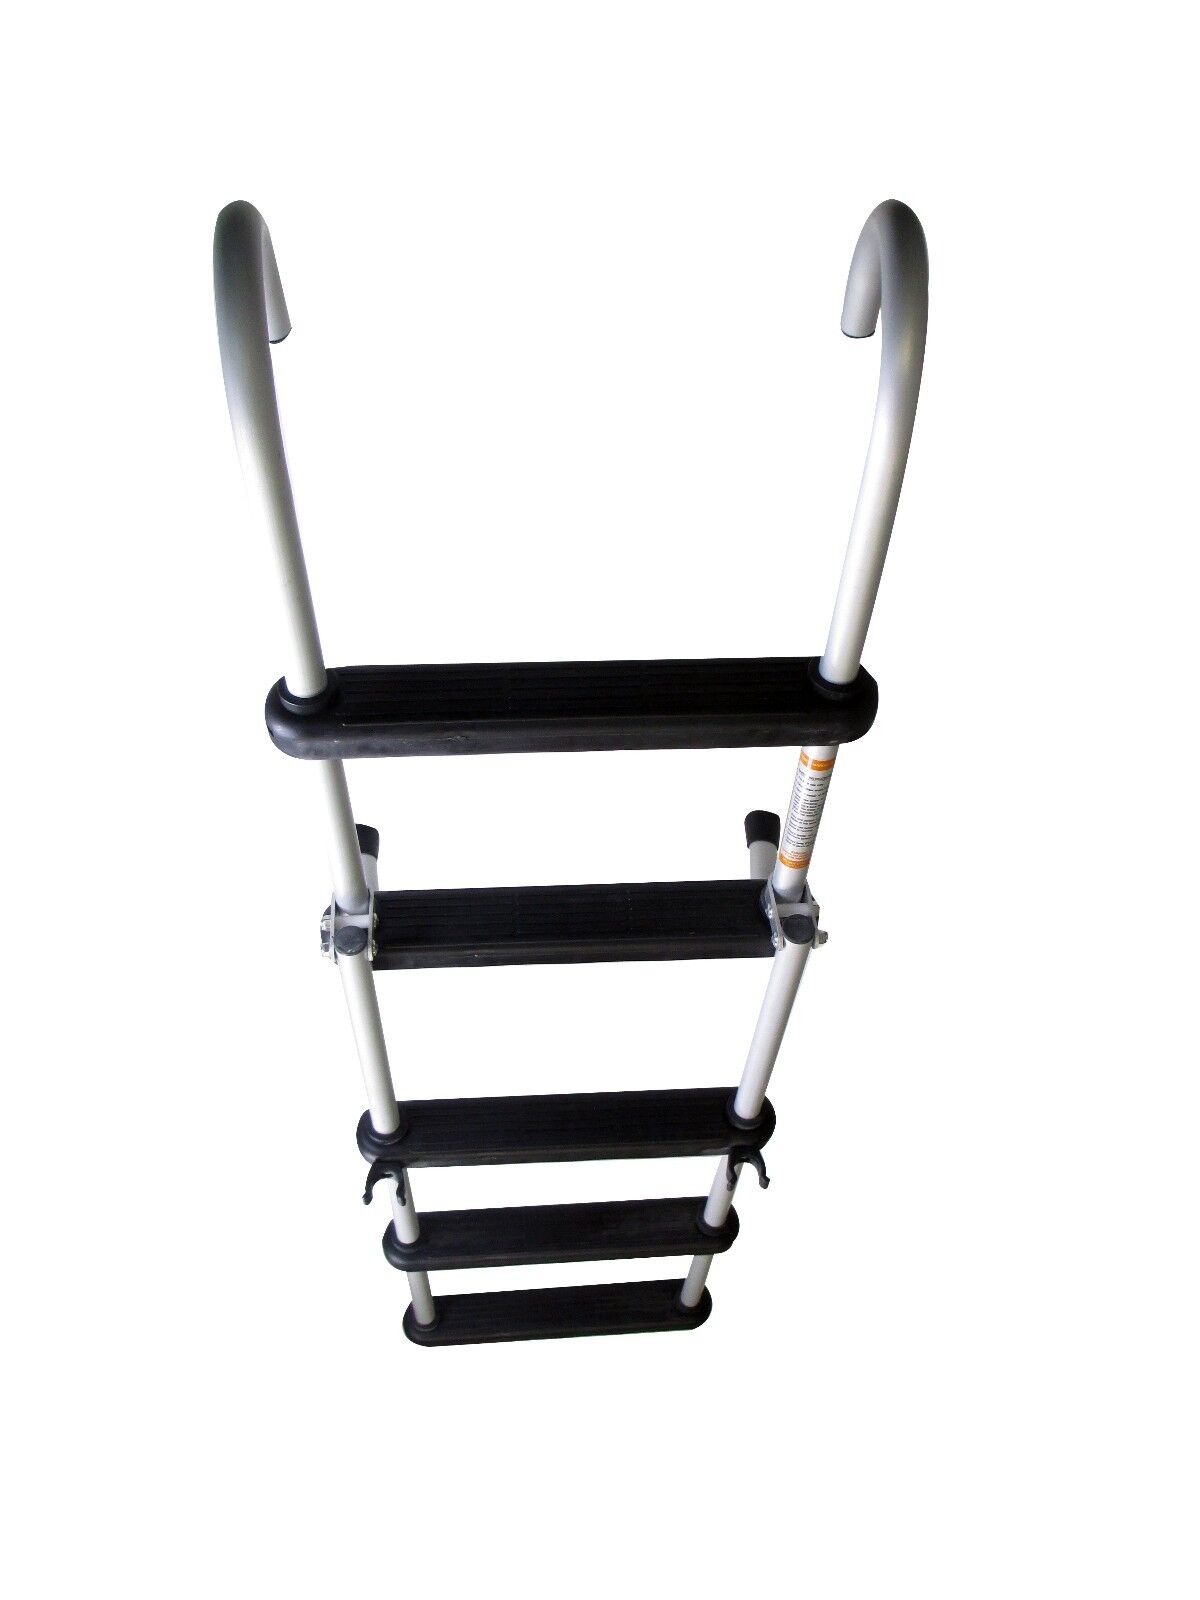 Pactrade Marine Pontoon Boat Removable Folding Ladder 5 Step Anodized Aluminum